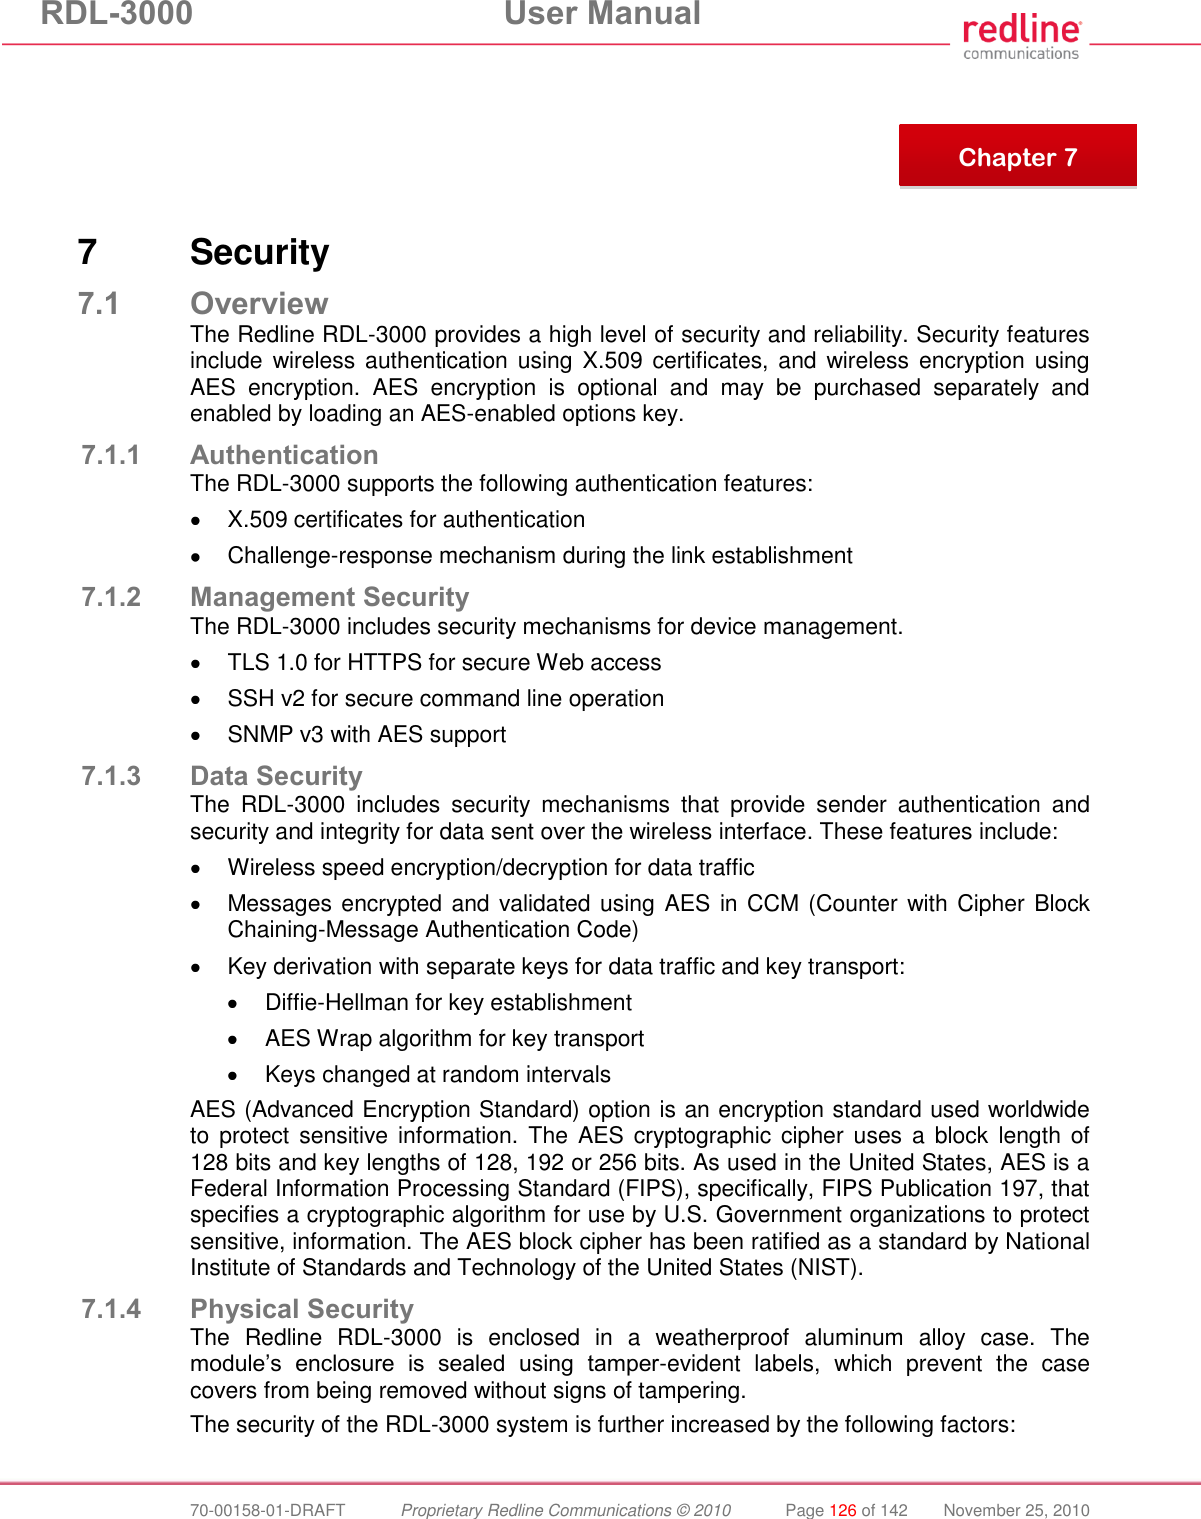 RDL-3000  User Manual  70-00158-01-DRAFT  Proprietary Redline Communications © 2010  Page 126 of 142  November 25, 2010        7  Security 7.1 Overview The Redline RDL-3000 provides a high level of security and reliability. Security features include wireless authentication  using  X.509 certificates,  and  wireless encryption using AES  encryption.  AES  encryption  is  optional  and  may  be  purchased  separately  and enabled by loading an AES-enabled options key. 7.1.1 Authentication The RDL-3000 supports the following authentication features:   X.509 certificates for authentication   Challenge-response mechanism during the link establishment 7.1.2 Management Security The RDL-3000 includes security mechanisms for device management.   TLS 1.0 for HTTPS for secure Web access   SSH v2 for secure command line operation   SNMP v3 with AES support 7.1.3 Data Security The  RDL-3000  includes  security  mechanisms  that  provide  sender  authentication  and security and integrity for data sent over the wireless interface. These features include:   Wireless speed encryption/decryption for data traffic   Messages encrypted and validated using AES in CCM (Counter with Cipher Block Chaining-Message Authentication Code)   Key derivation with separate keys for data traffic and key transport:   Diffie-Hellman for key establishment   AES Wrap algorithm for key transport   Keys changed at random intervals AES (Advanced Encryption Standard) option is an encryption standard used worldwide to  protect  sensitive information.  The AES cryptographic cipher  uses a  block  length of 128 bits and key lengths of 128, 192 or 256 bits. As used in the United States, AES is a Federal Information Processing Standard (FIPS), specifically, FIPS Publication 197, that specifies a cryptographic algorithm for use by U.S. Government organizations to protect sensitive, information. The AES block cipher has been ratified as a standard by National Institute of Standards and Technology of the United States (NIST). 7.1.4 Physical Security The  Redline  RDL-3000  is  enclosed  in  a  weatherproof  aluminum  alloy  case.  The module’s  enclosure  is  sealed  using  tamper-evident  labels,  which  prevent  the  case covers from being removed without signs of tampering.   The security of the RDL-3000 system is further increased by the following factors:  Chapter 7 